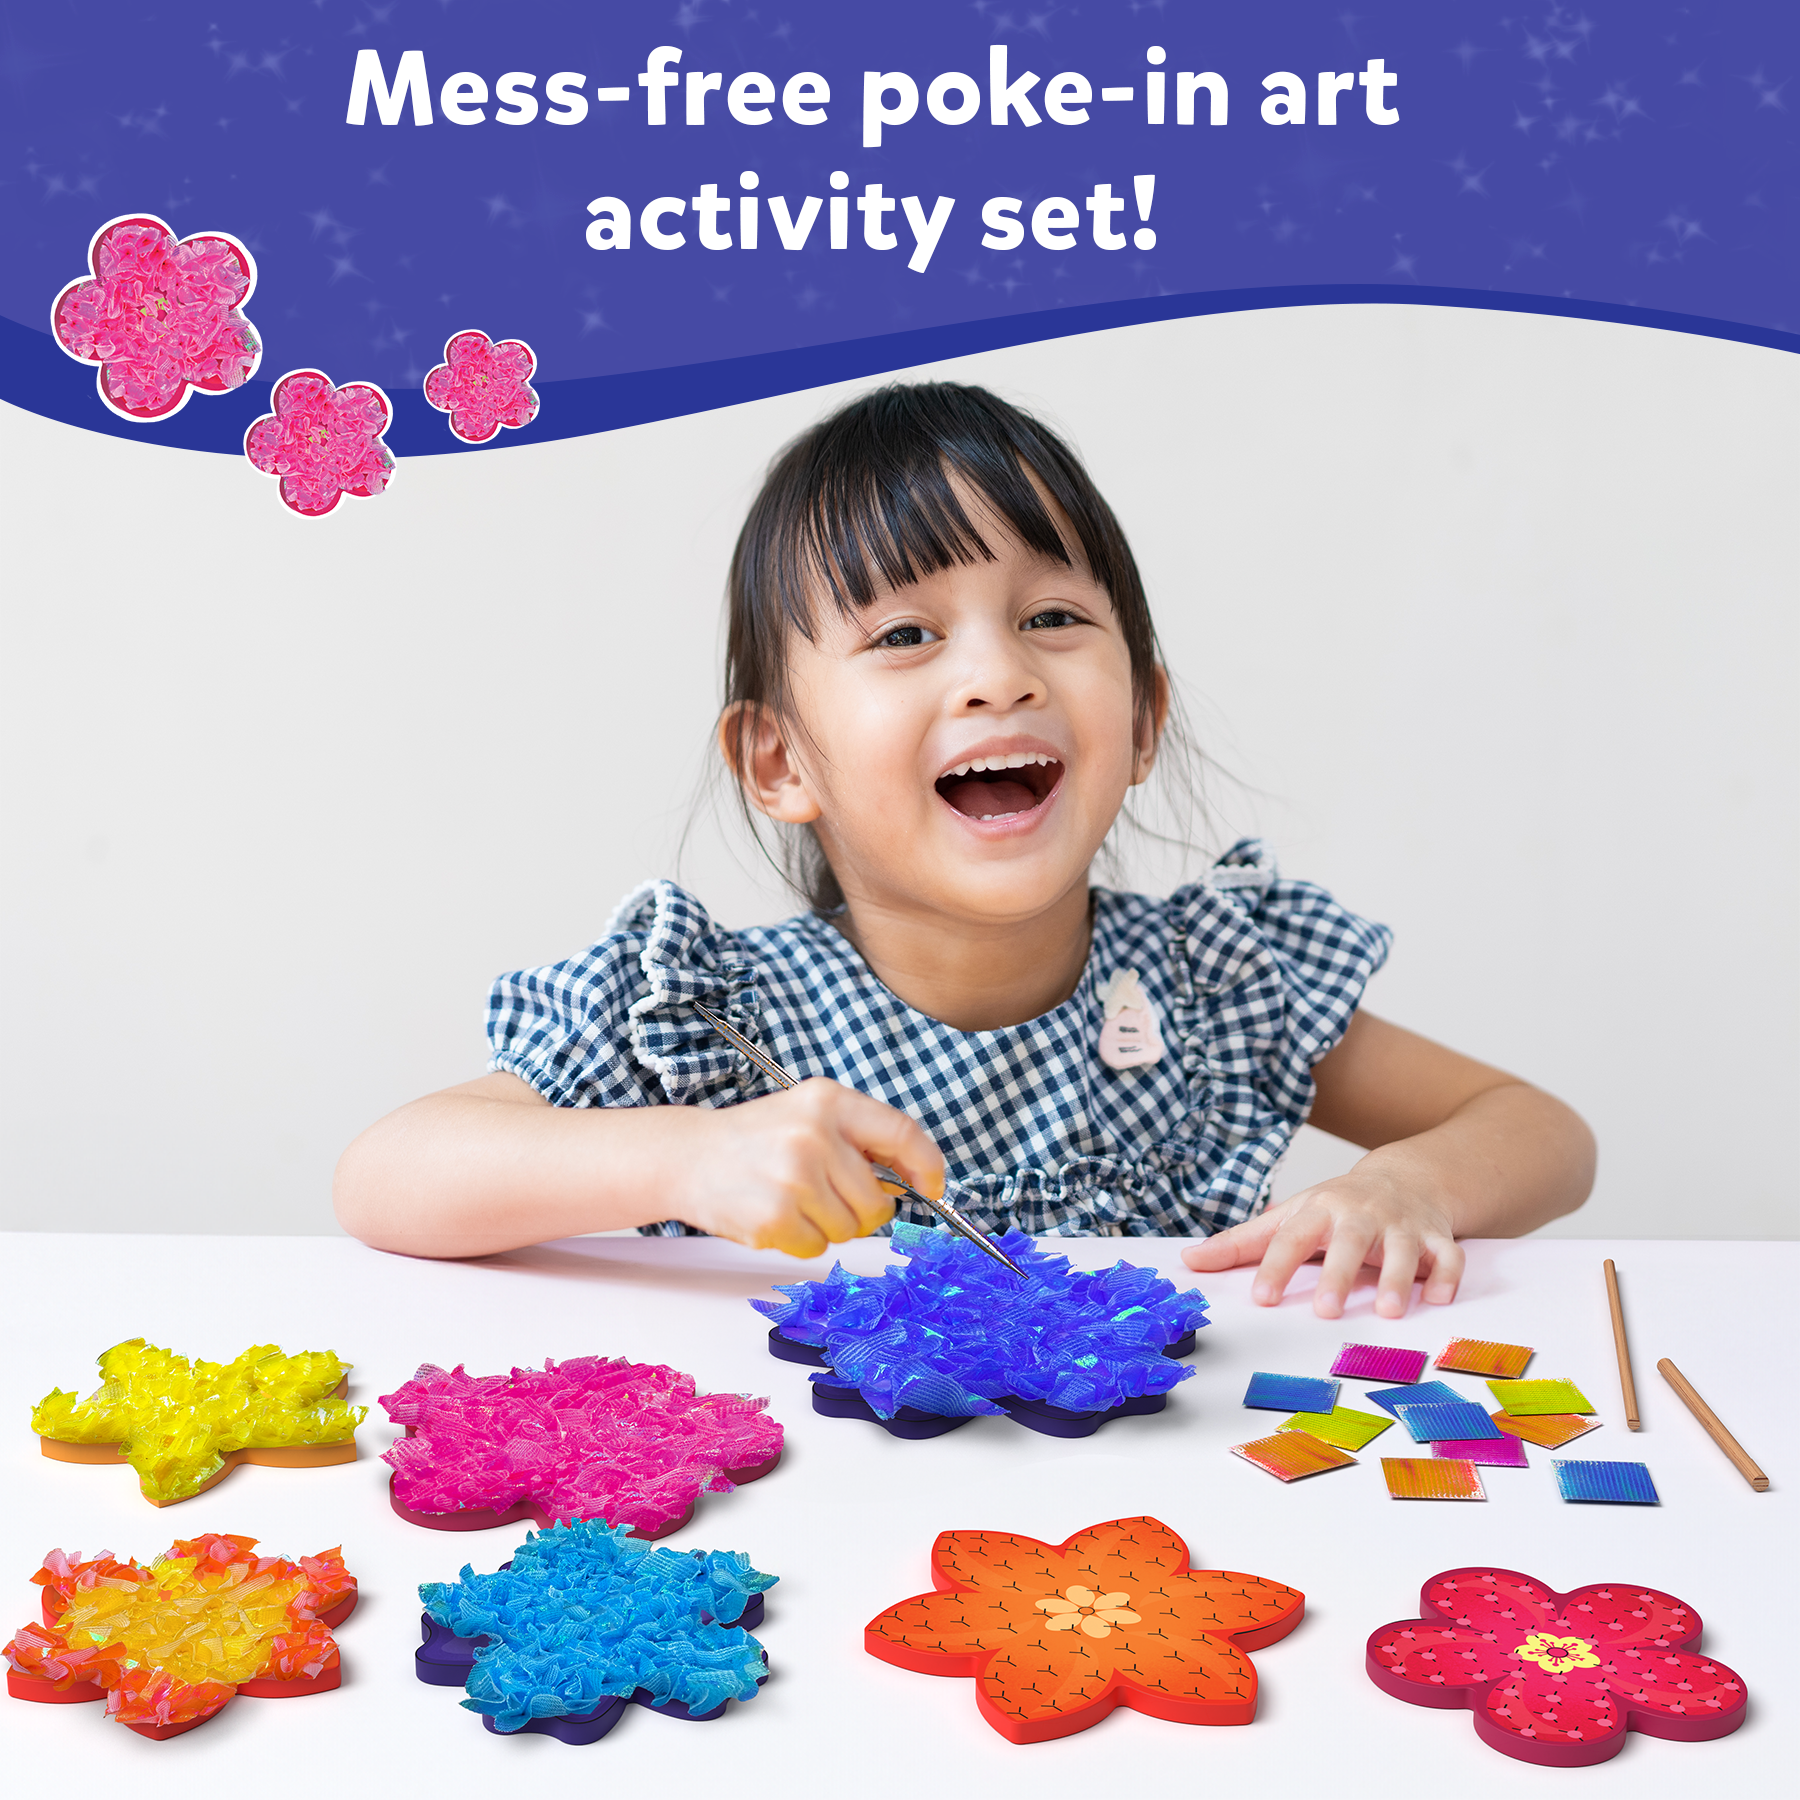 Skillmatics Art & Craft Actvity - Poke-in Art Flower Bouquet, Mess-Free Art for Kids, Craft Kits, DIY Activity, Gifts for Girls & Boys Ages 4, 5, 6, 7, 8, 9